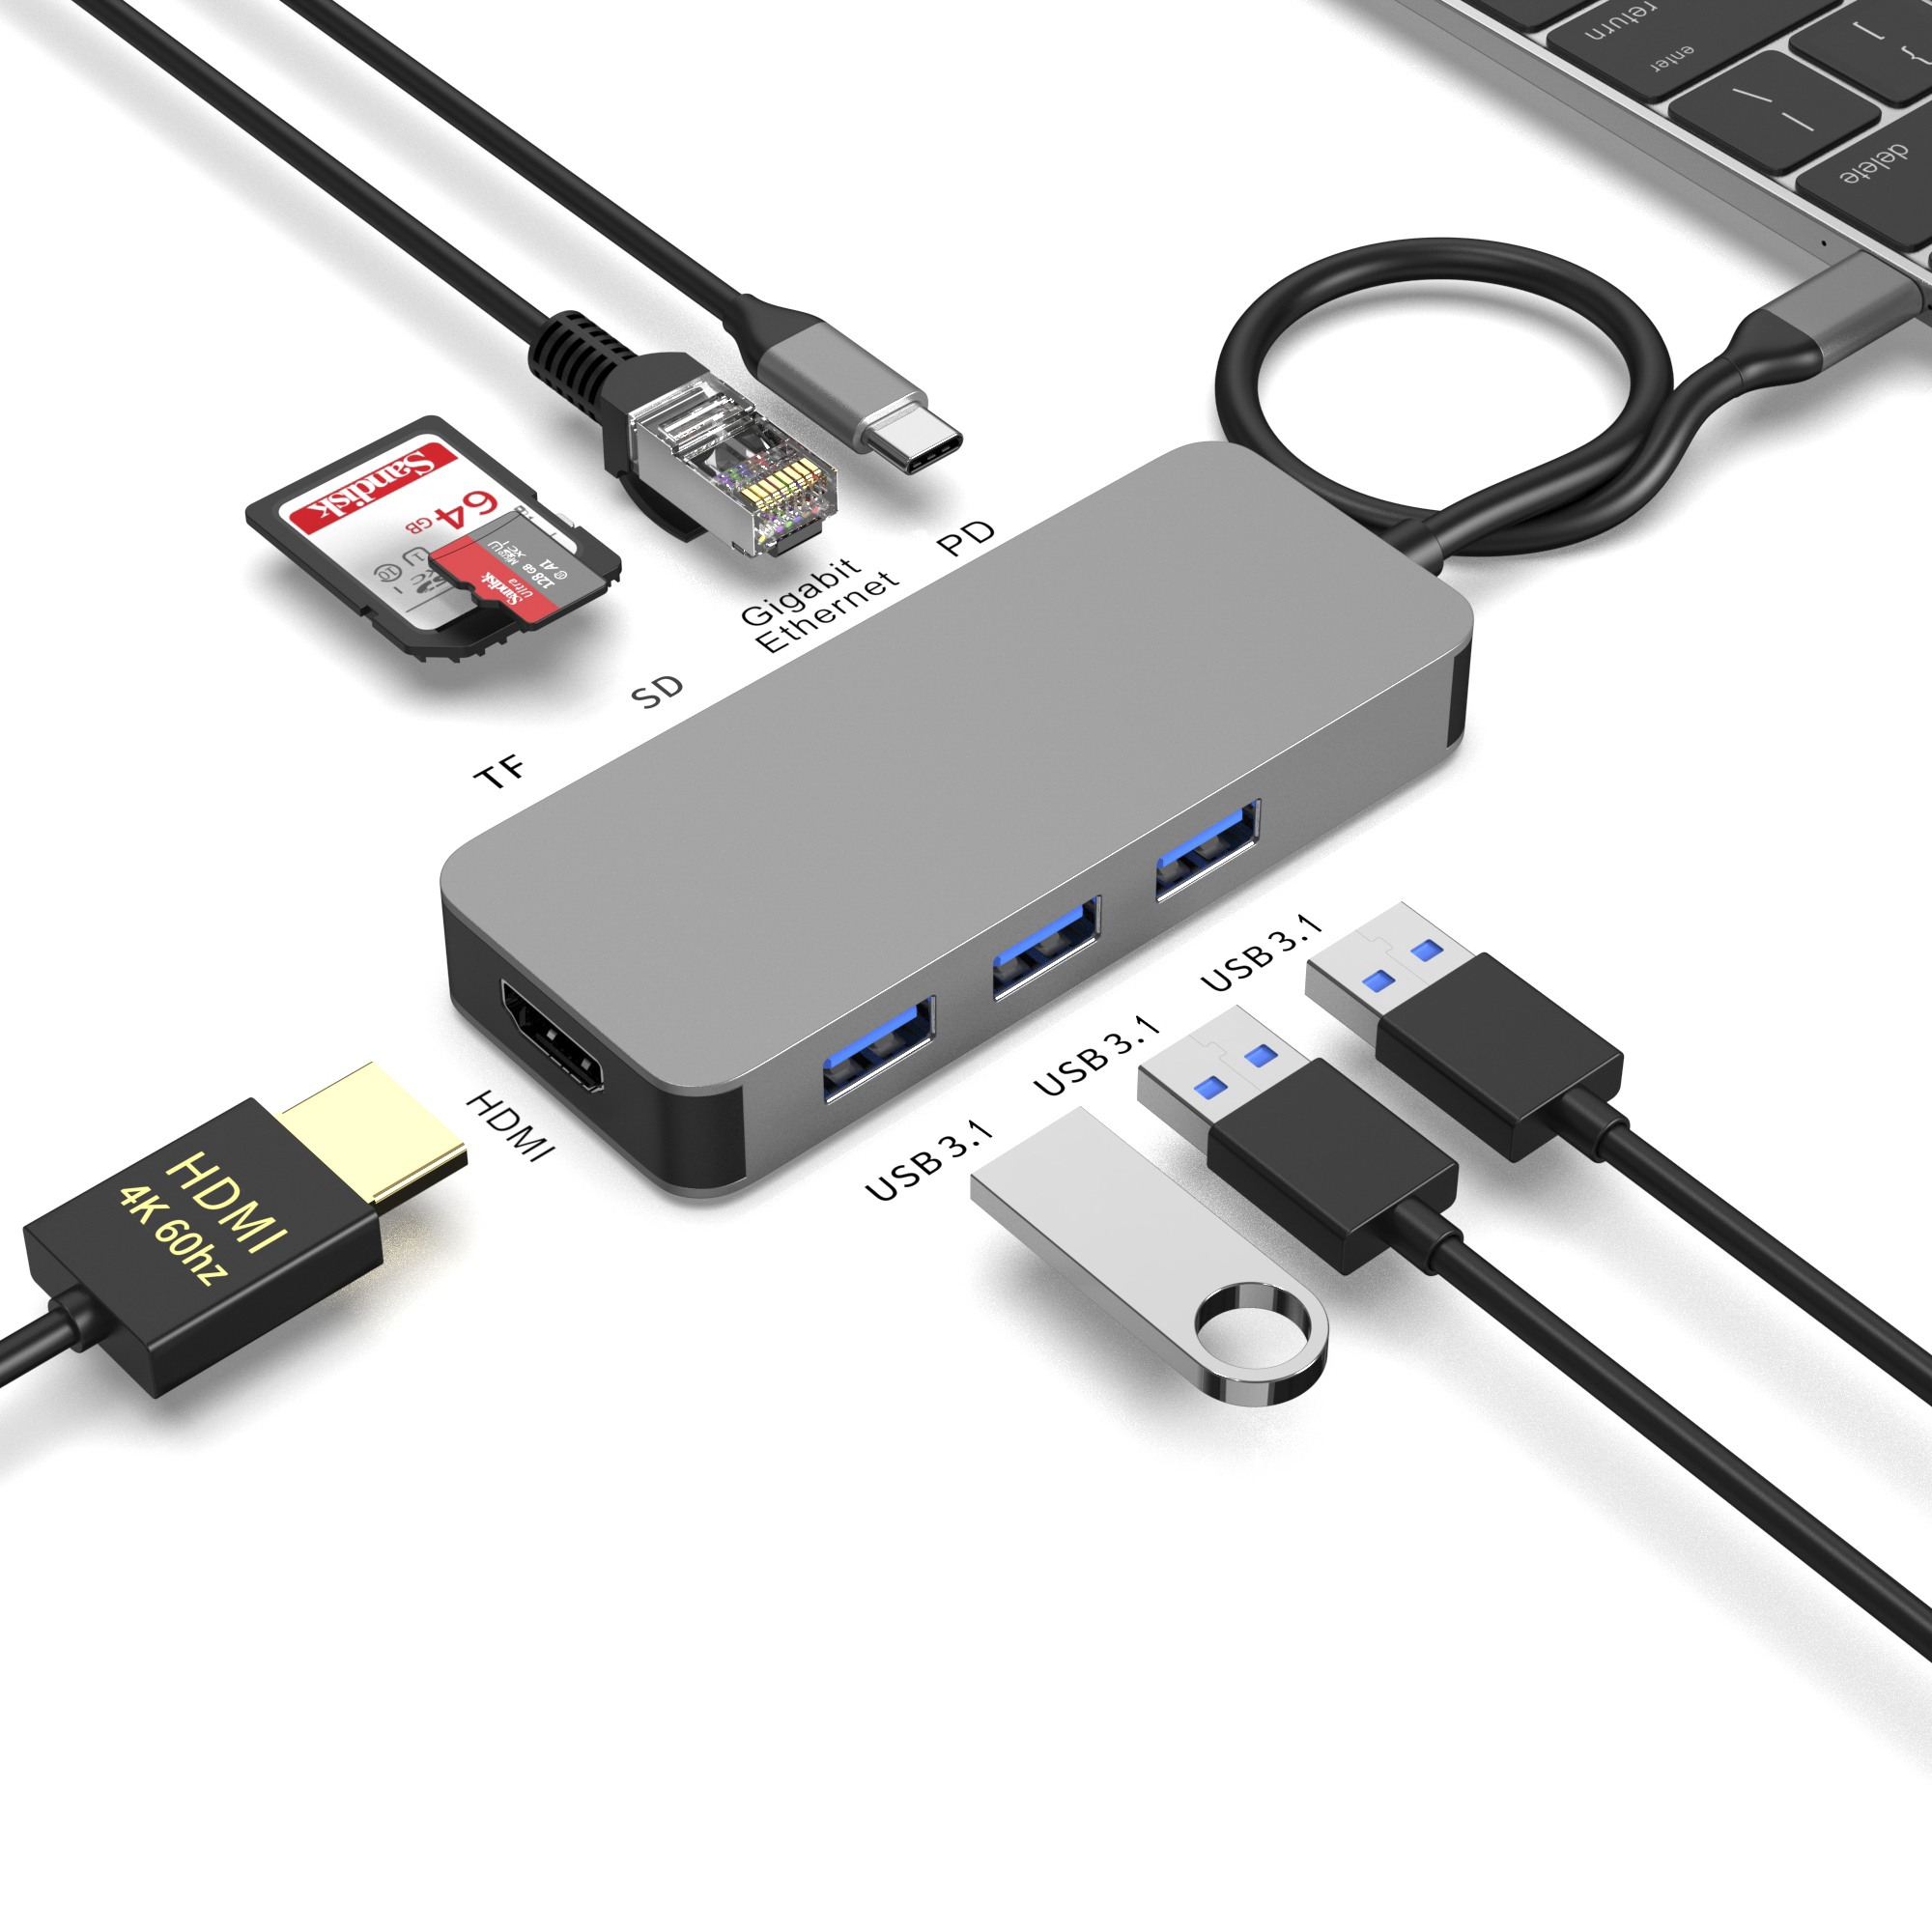 8 IN 1 usb c hub TYPE-C to HDMI 4K@60HZ+PD100W+Gigabit RJ45 1000Mbps+3 * USB-A 3.1 10Gbps+SD+TF multifunction docking station for laptop/phone